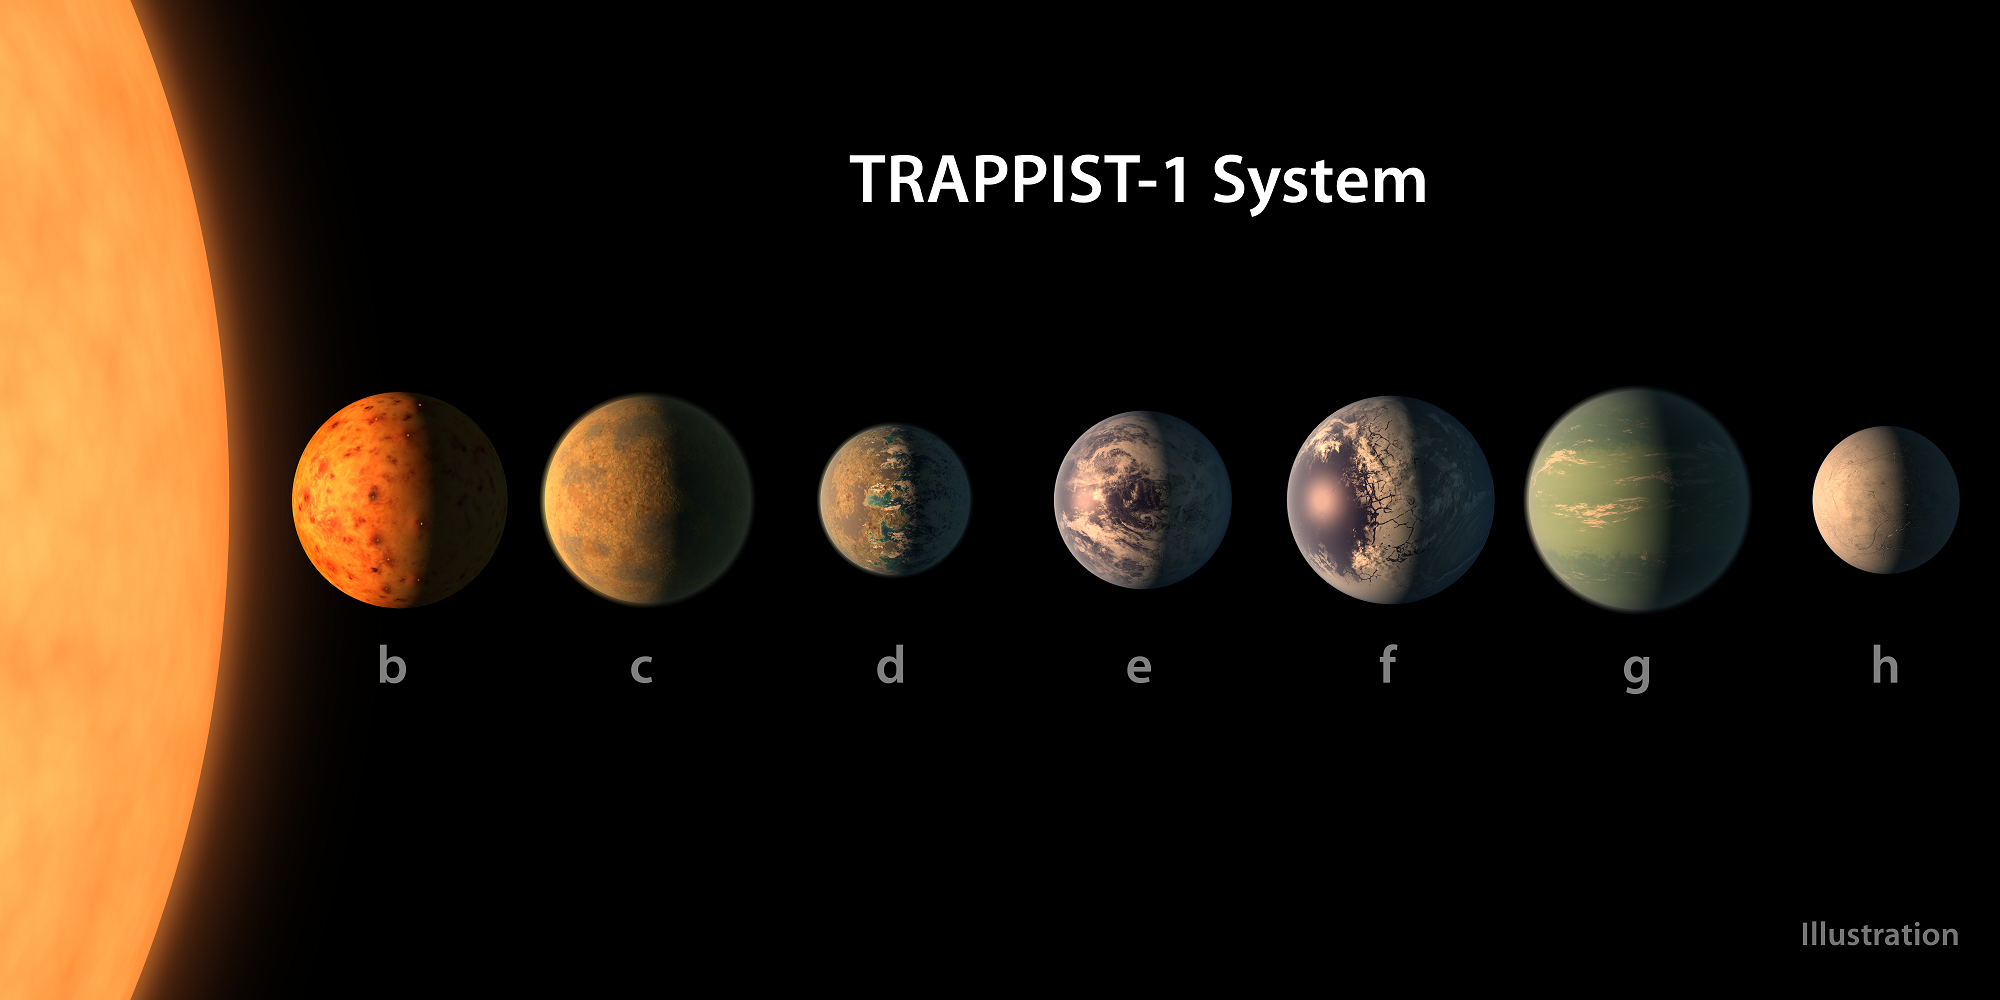 SETI Has Already Tried Listening to TRAPPIST-1 for Aliens